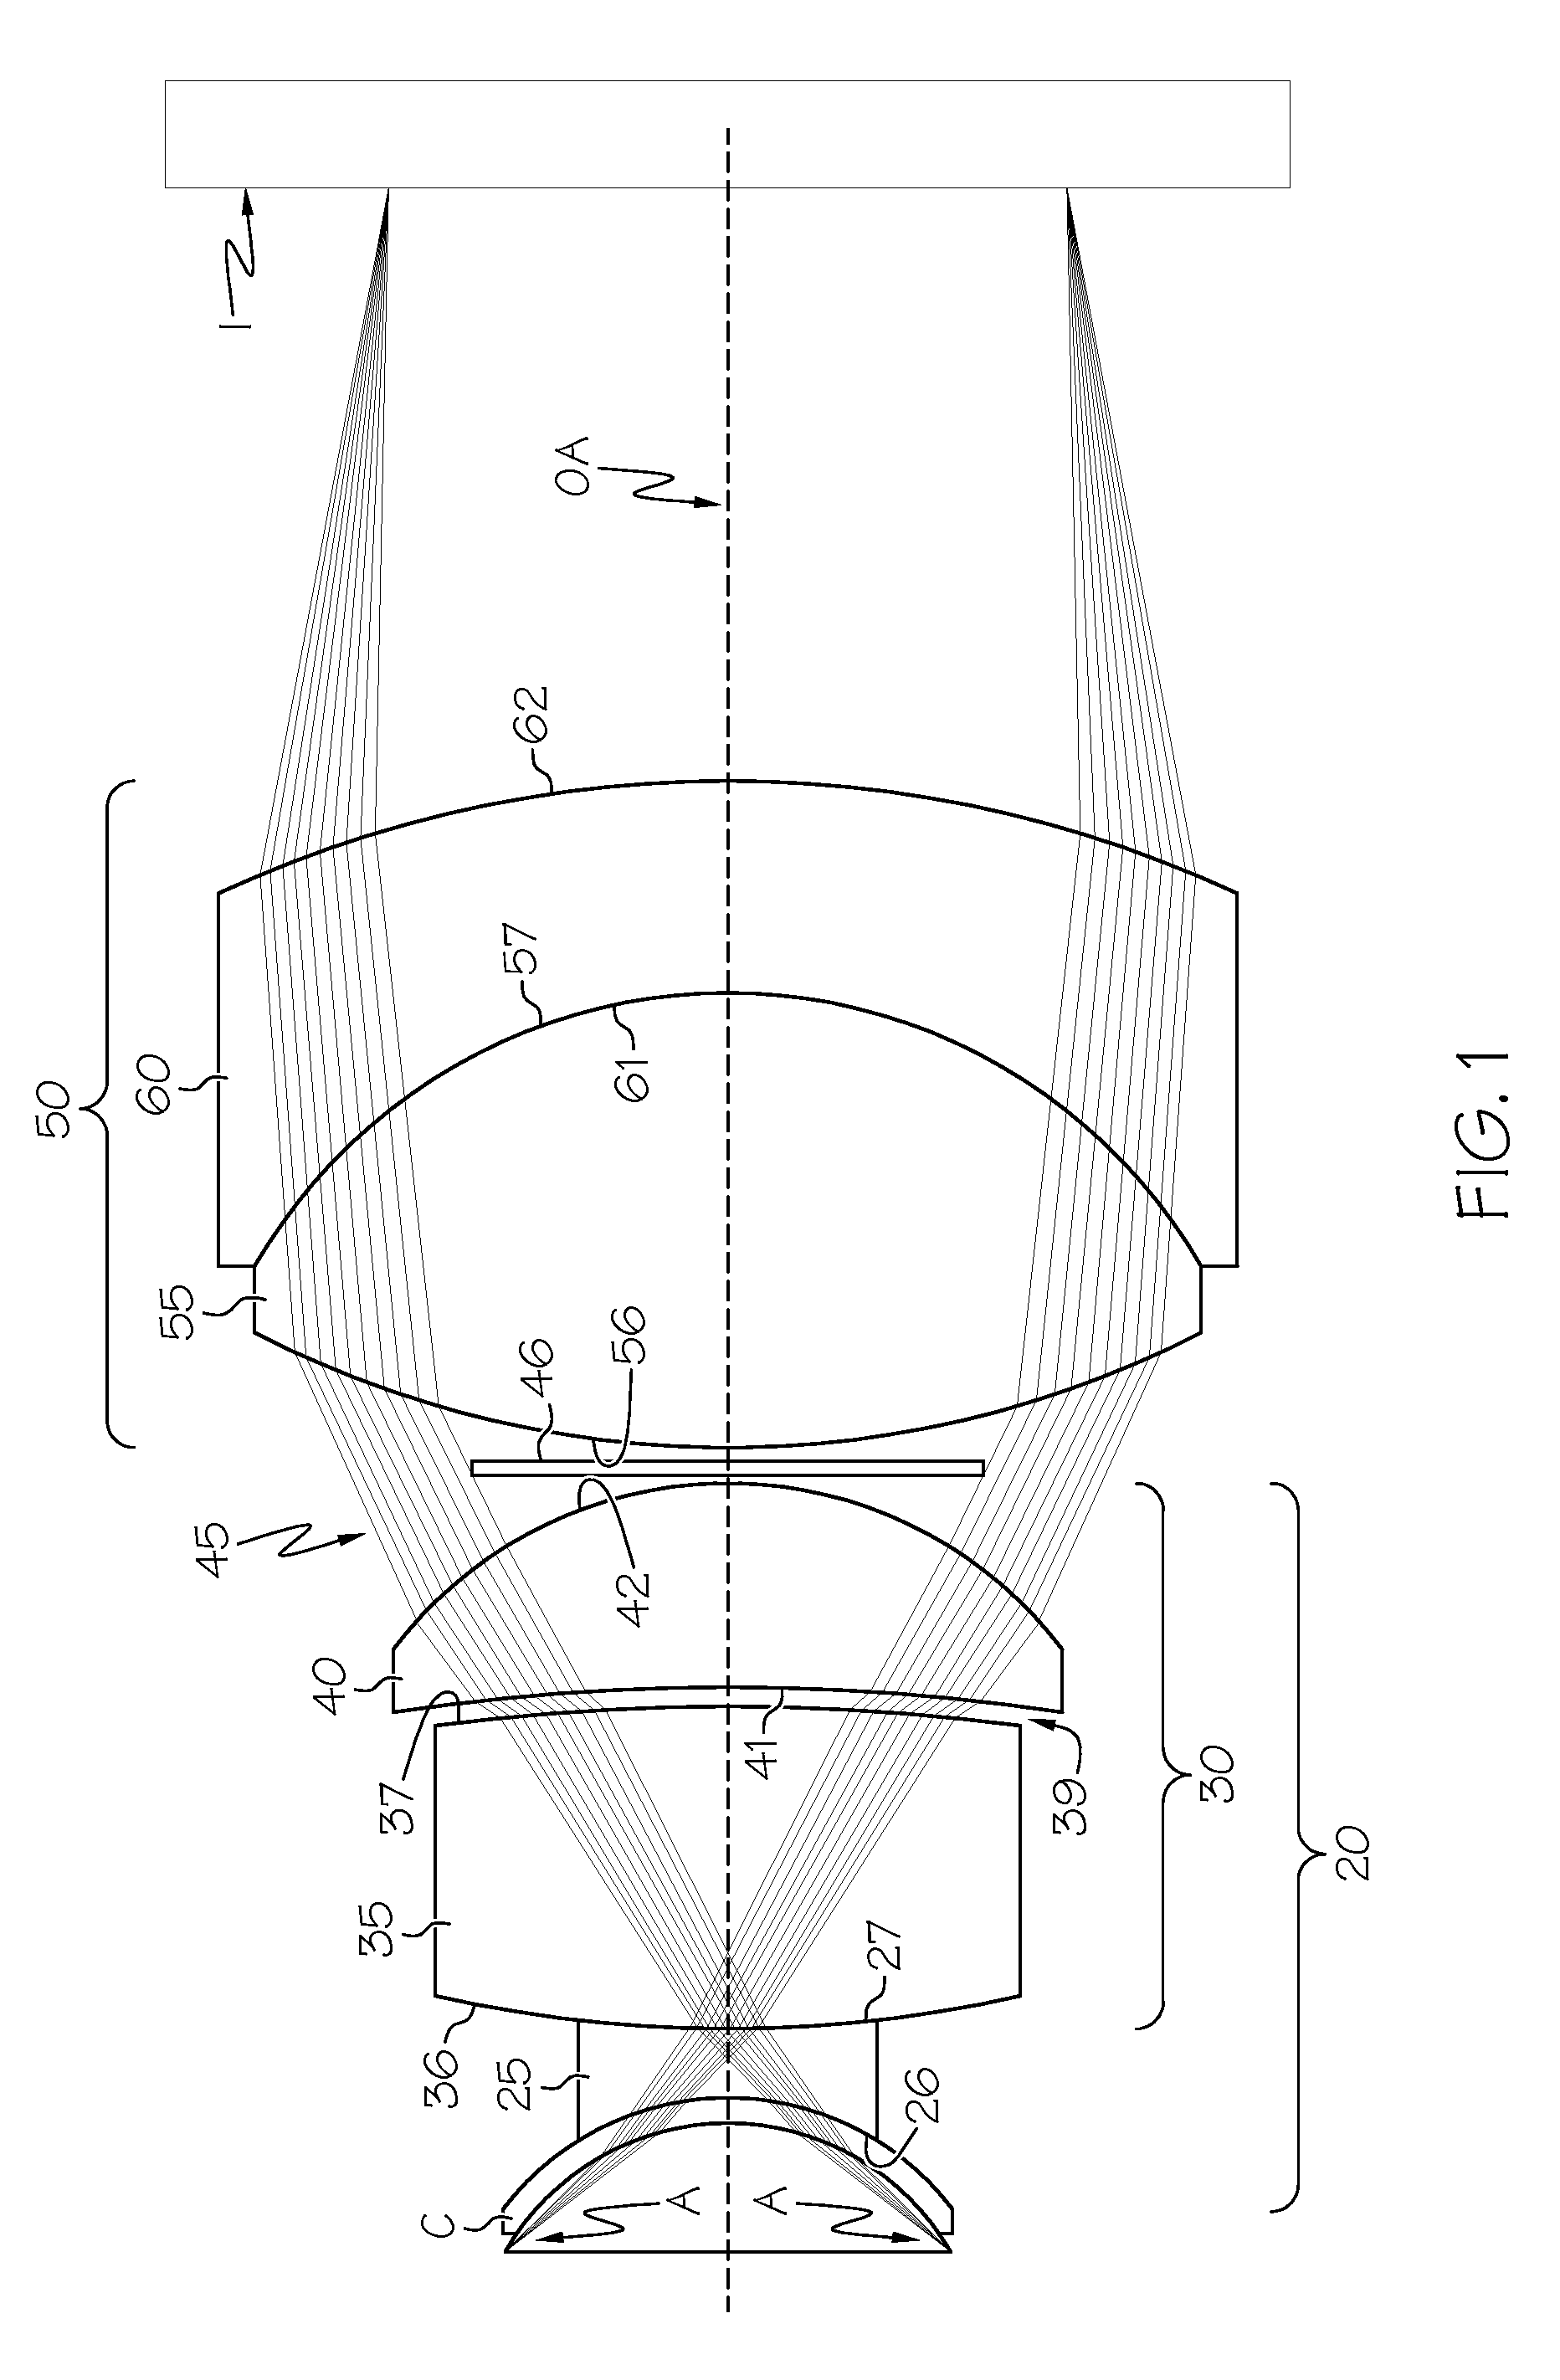 Ophthalmoscopy lens system